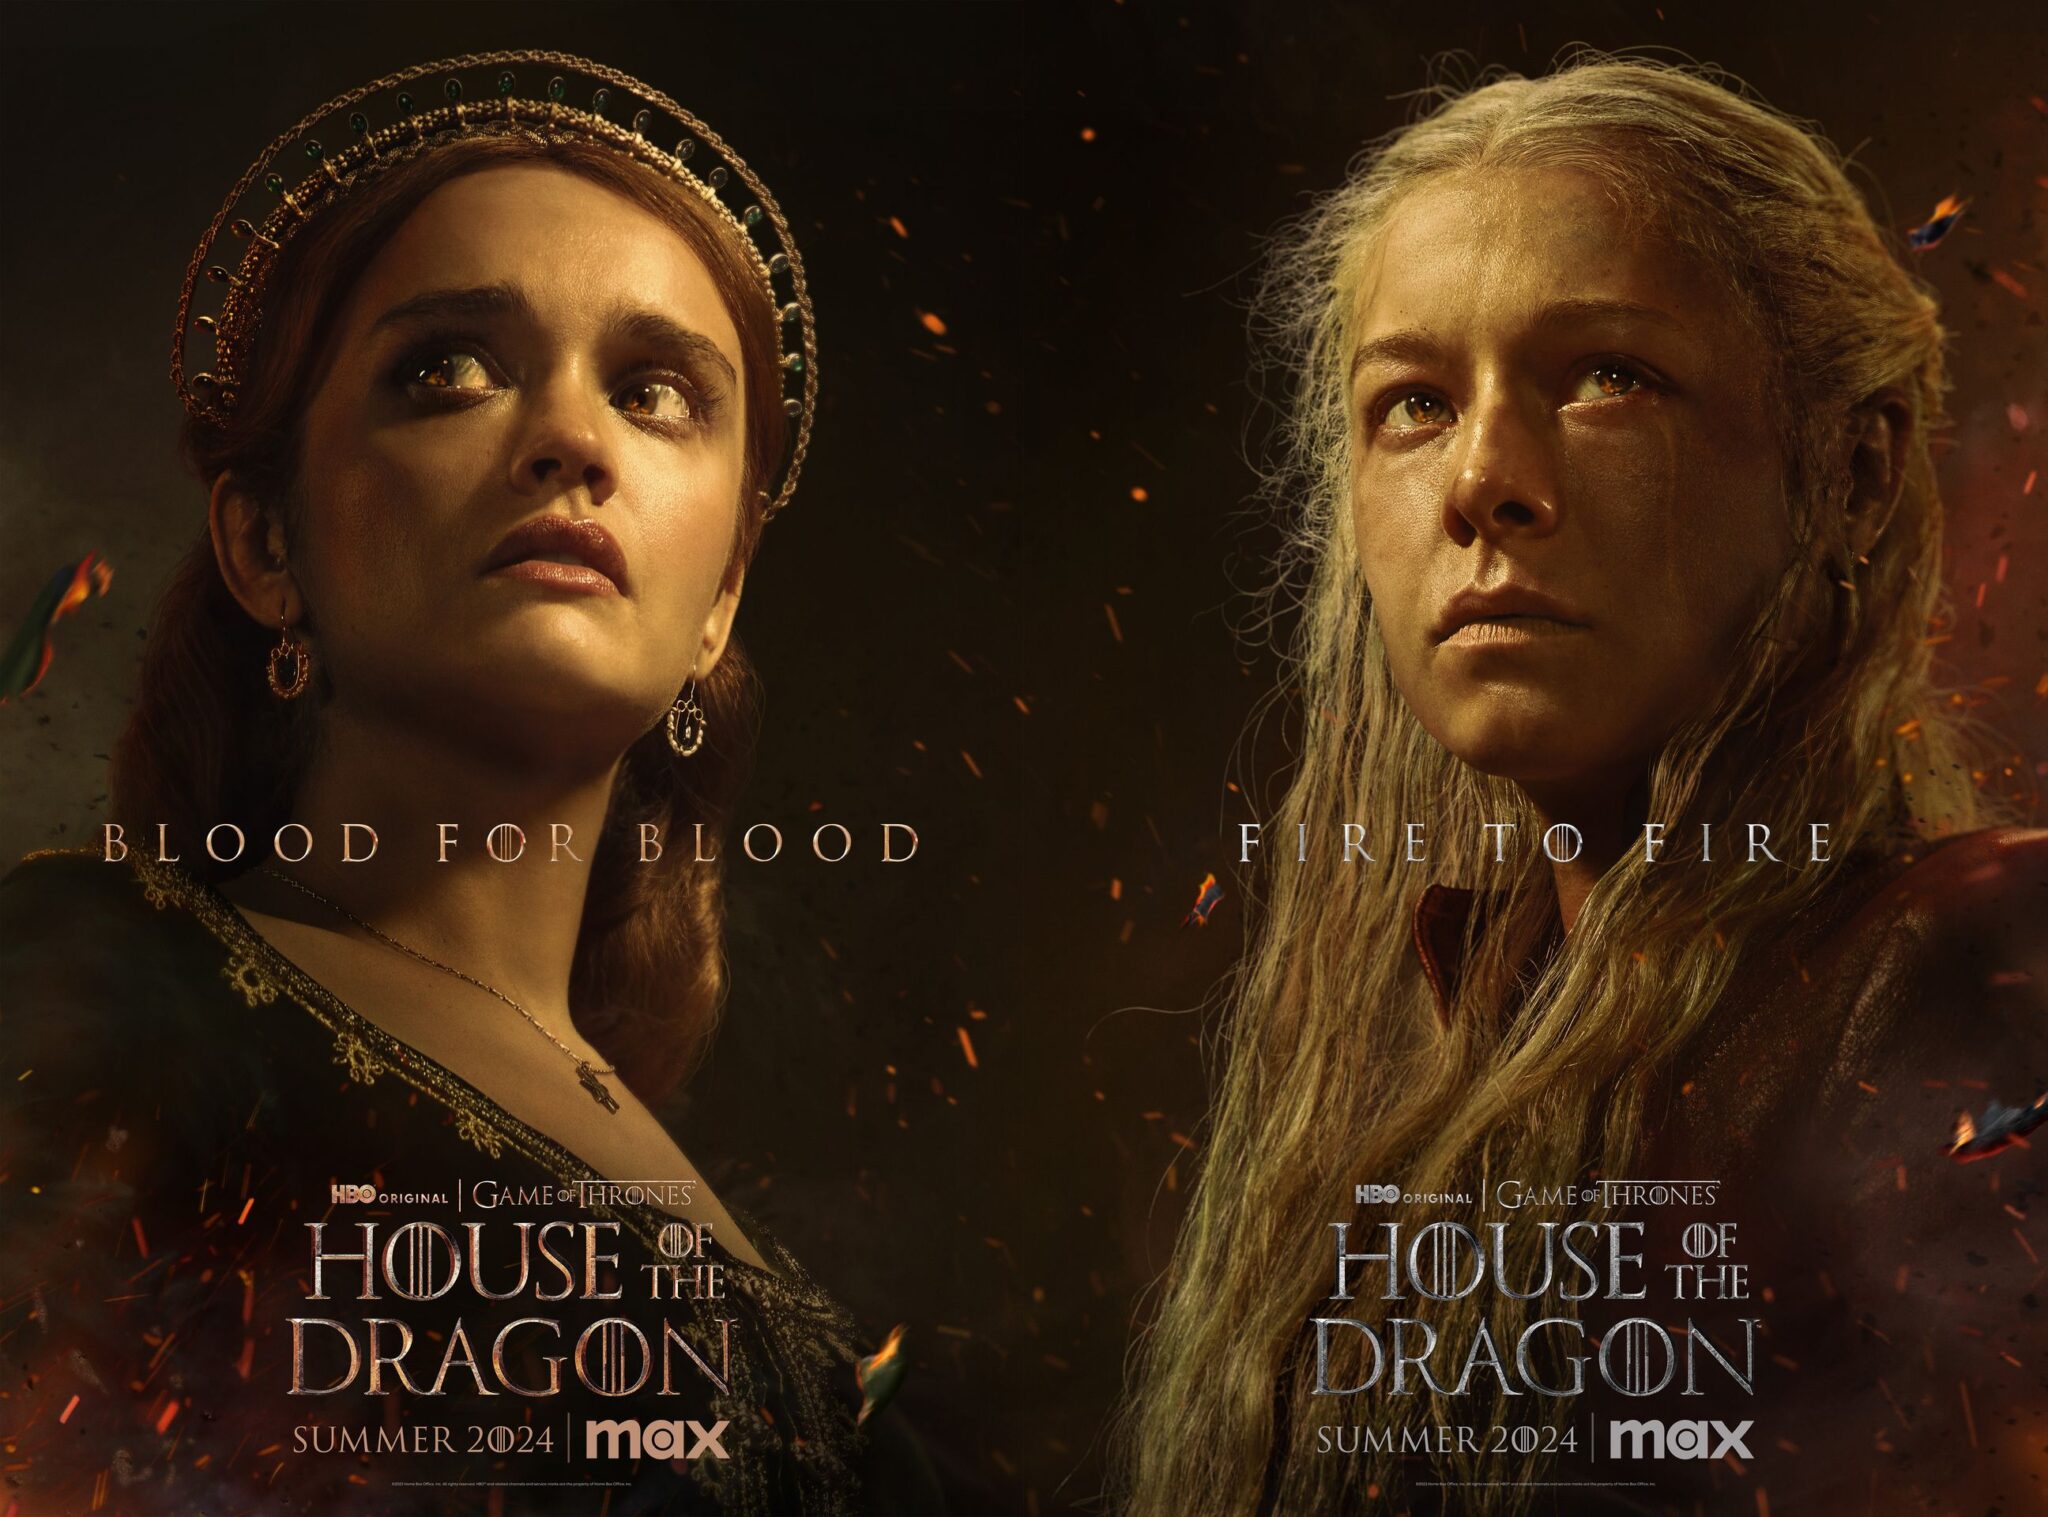 'House of the Dragon' Posters Tease Rhaenyra & Alicent's Season 2 Conflict